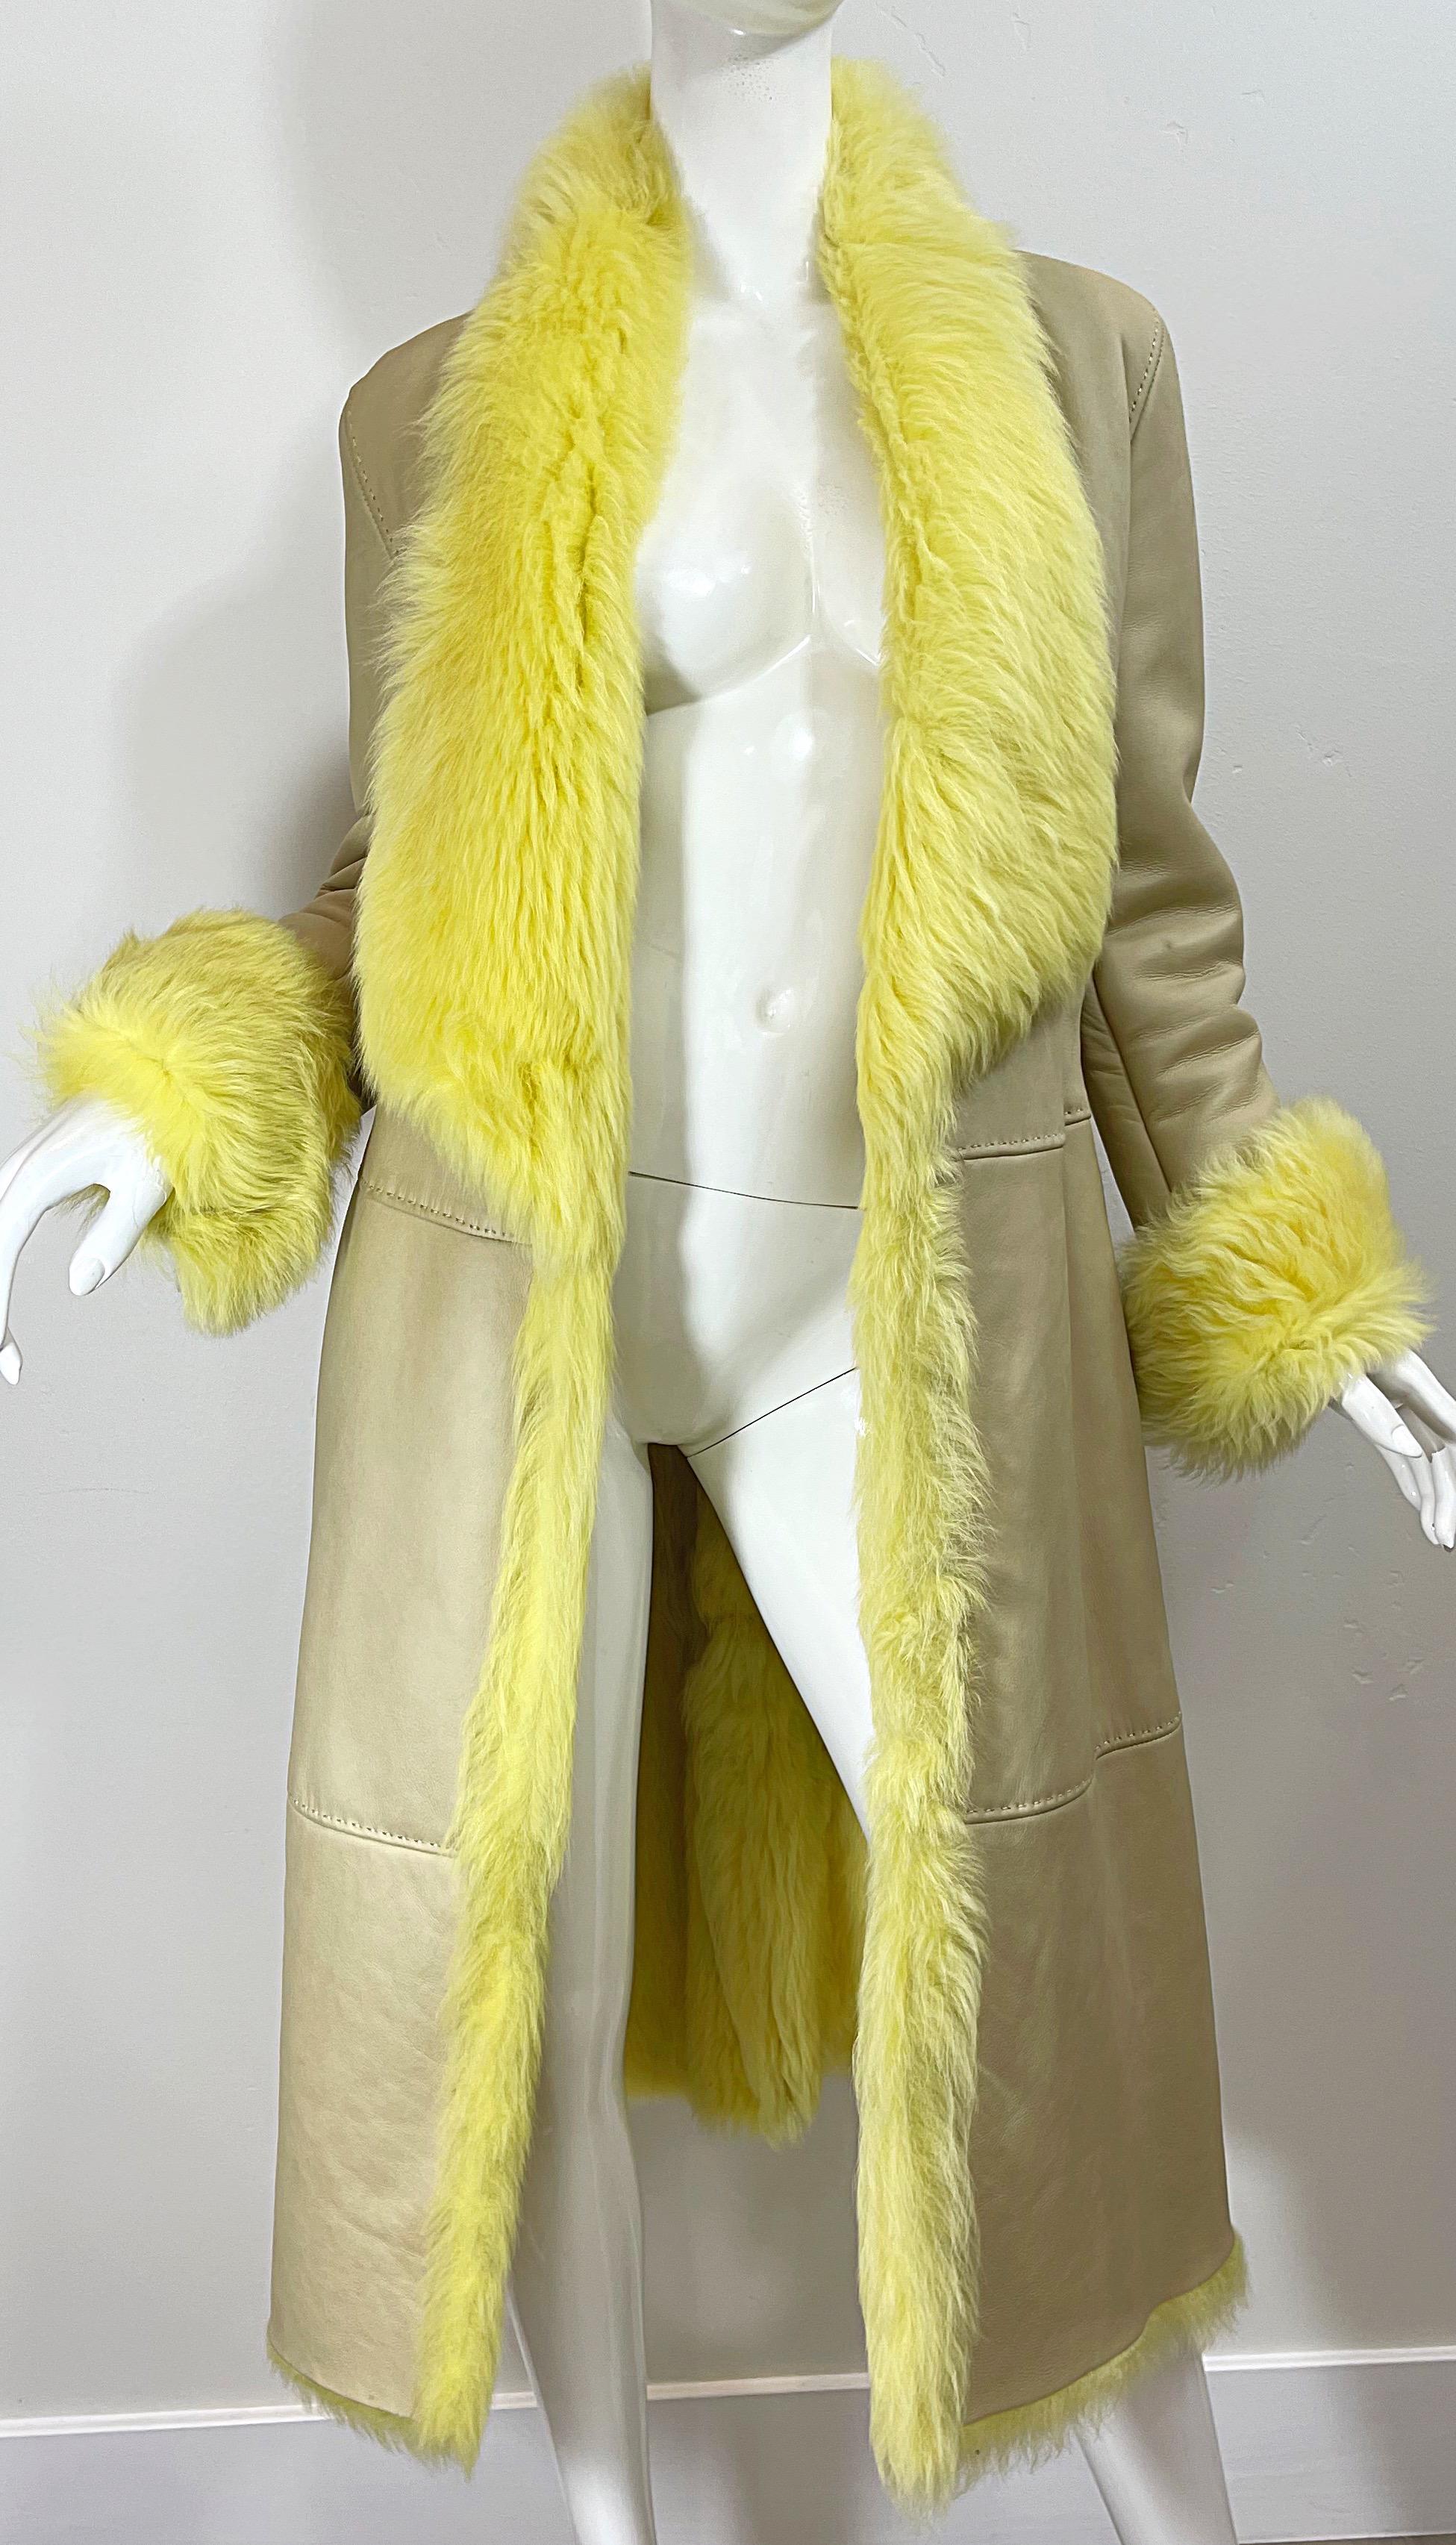 Beige 1990s Gianni Versace Tan Leather Yellow Shearling Fur Vintage Trench Coat Jacket For Sale